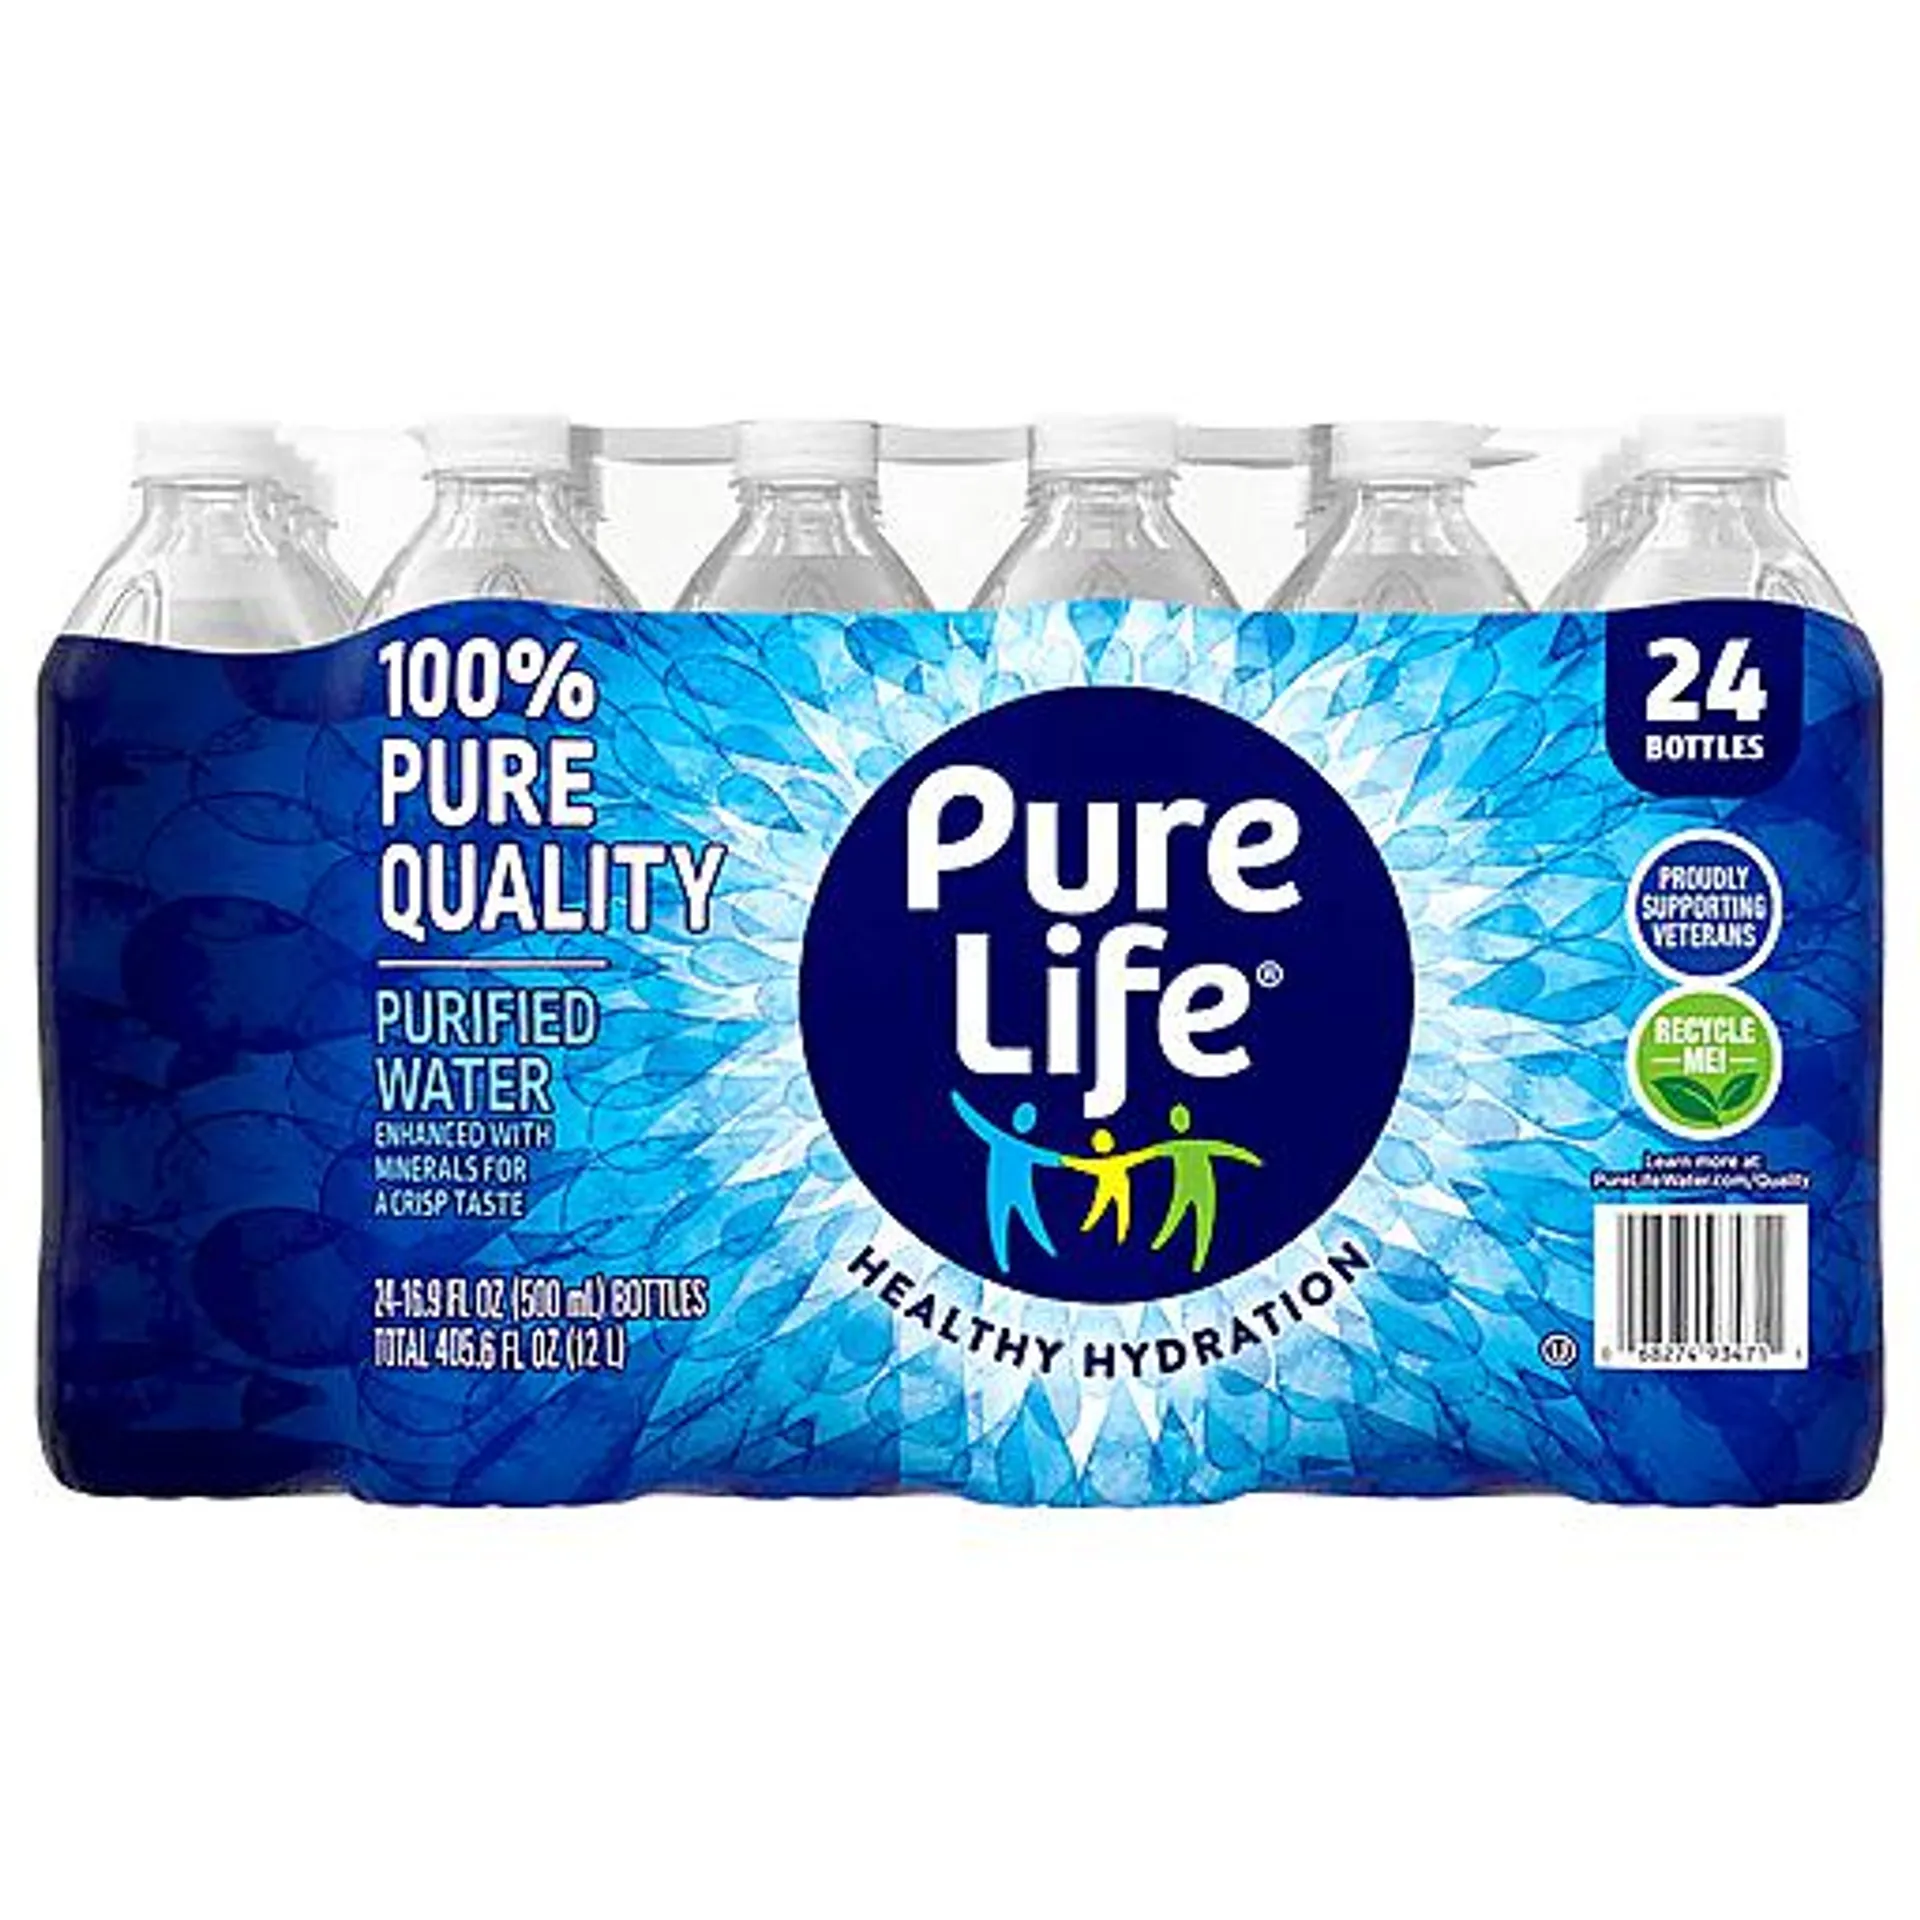 Nestle Pure Life Purified Water 16.9 fl oz bottle 24 pack